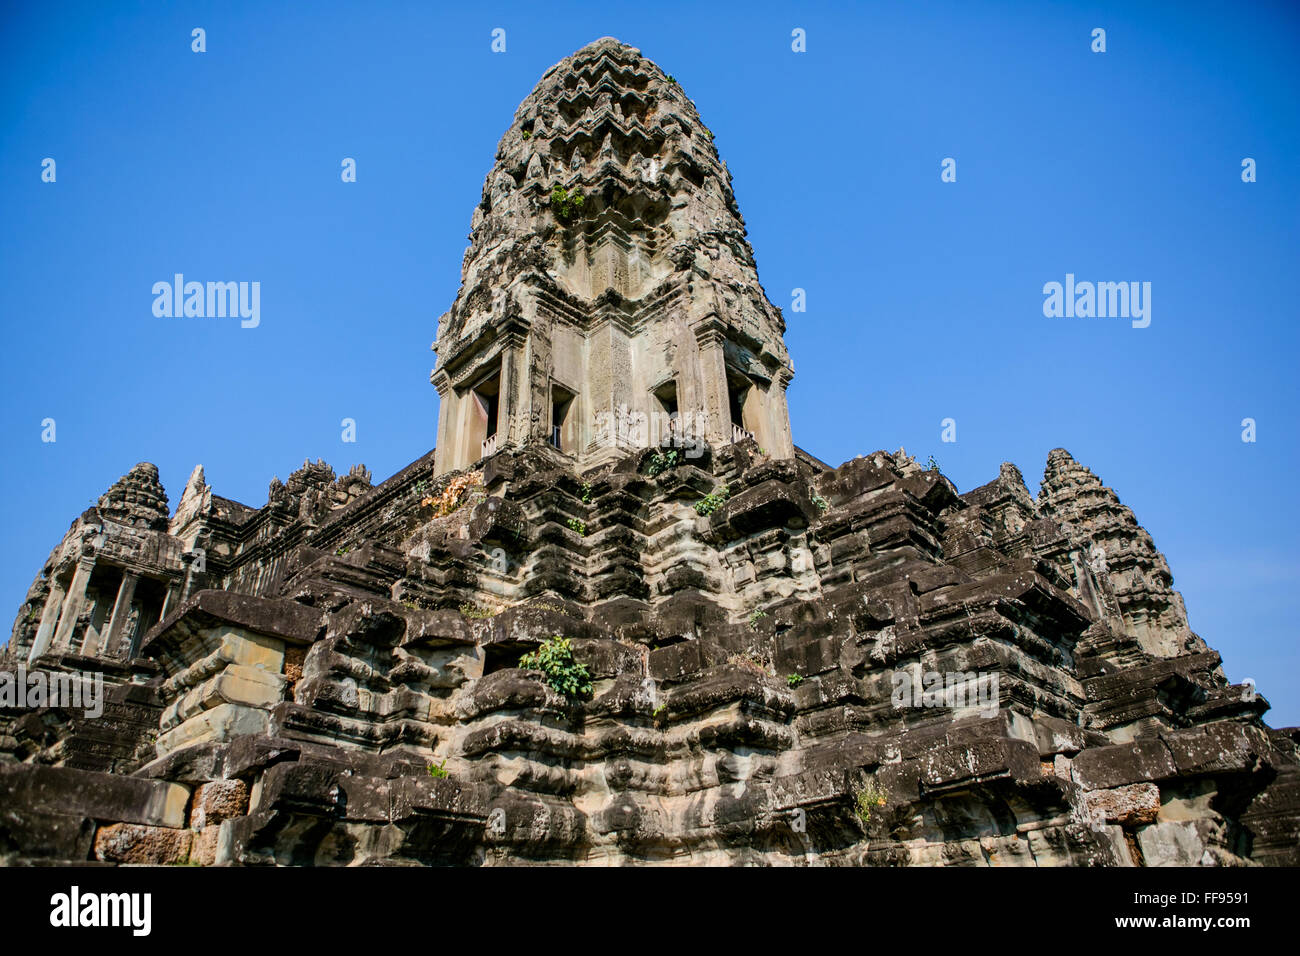 Angkor Wat temple structure Stock Photo